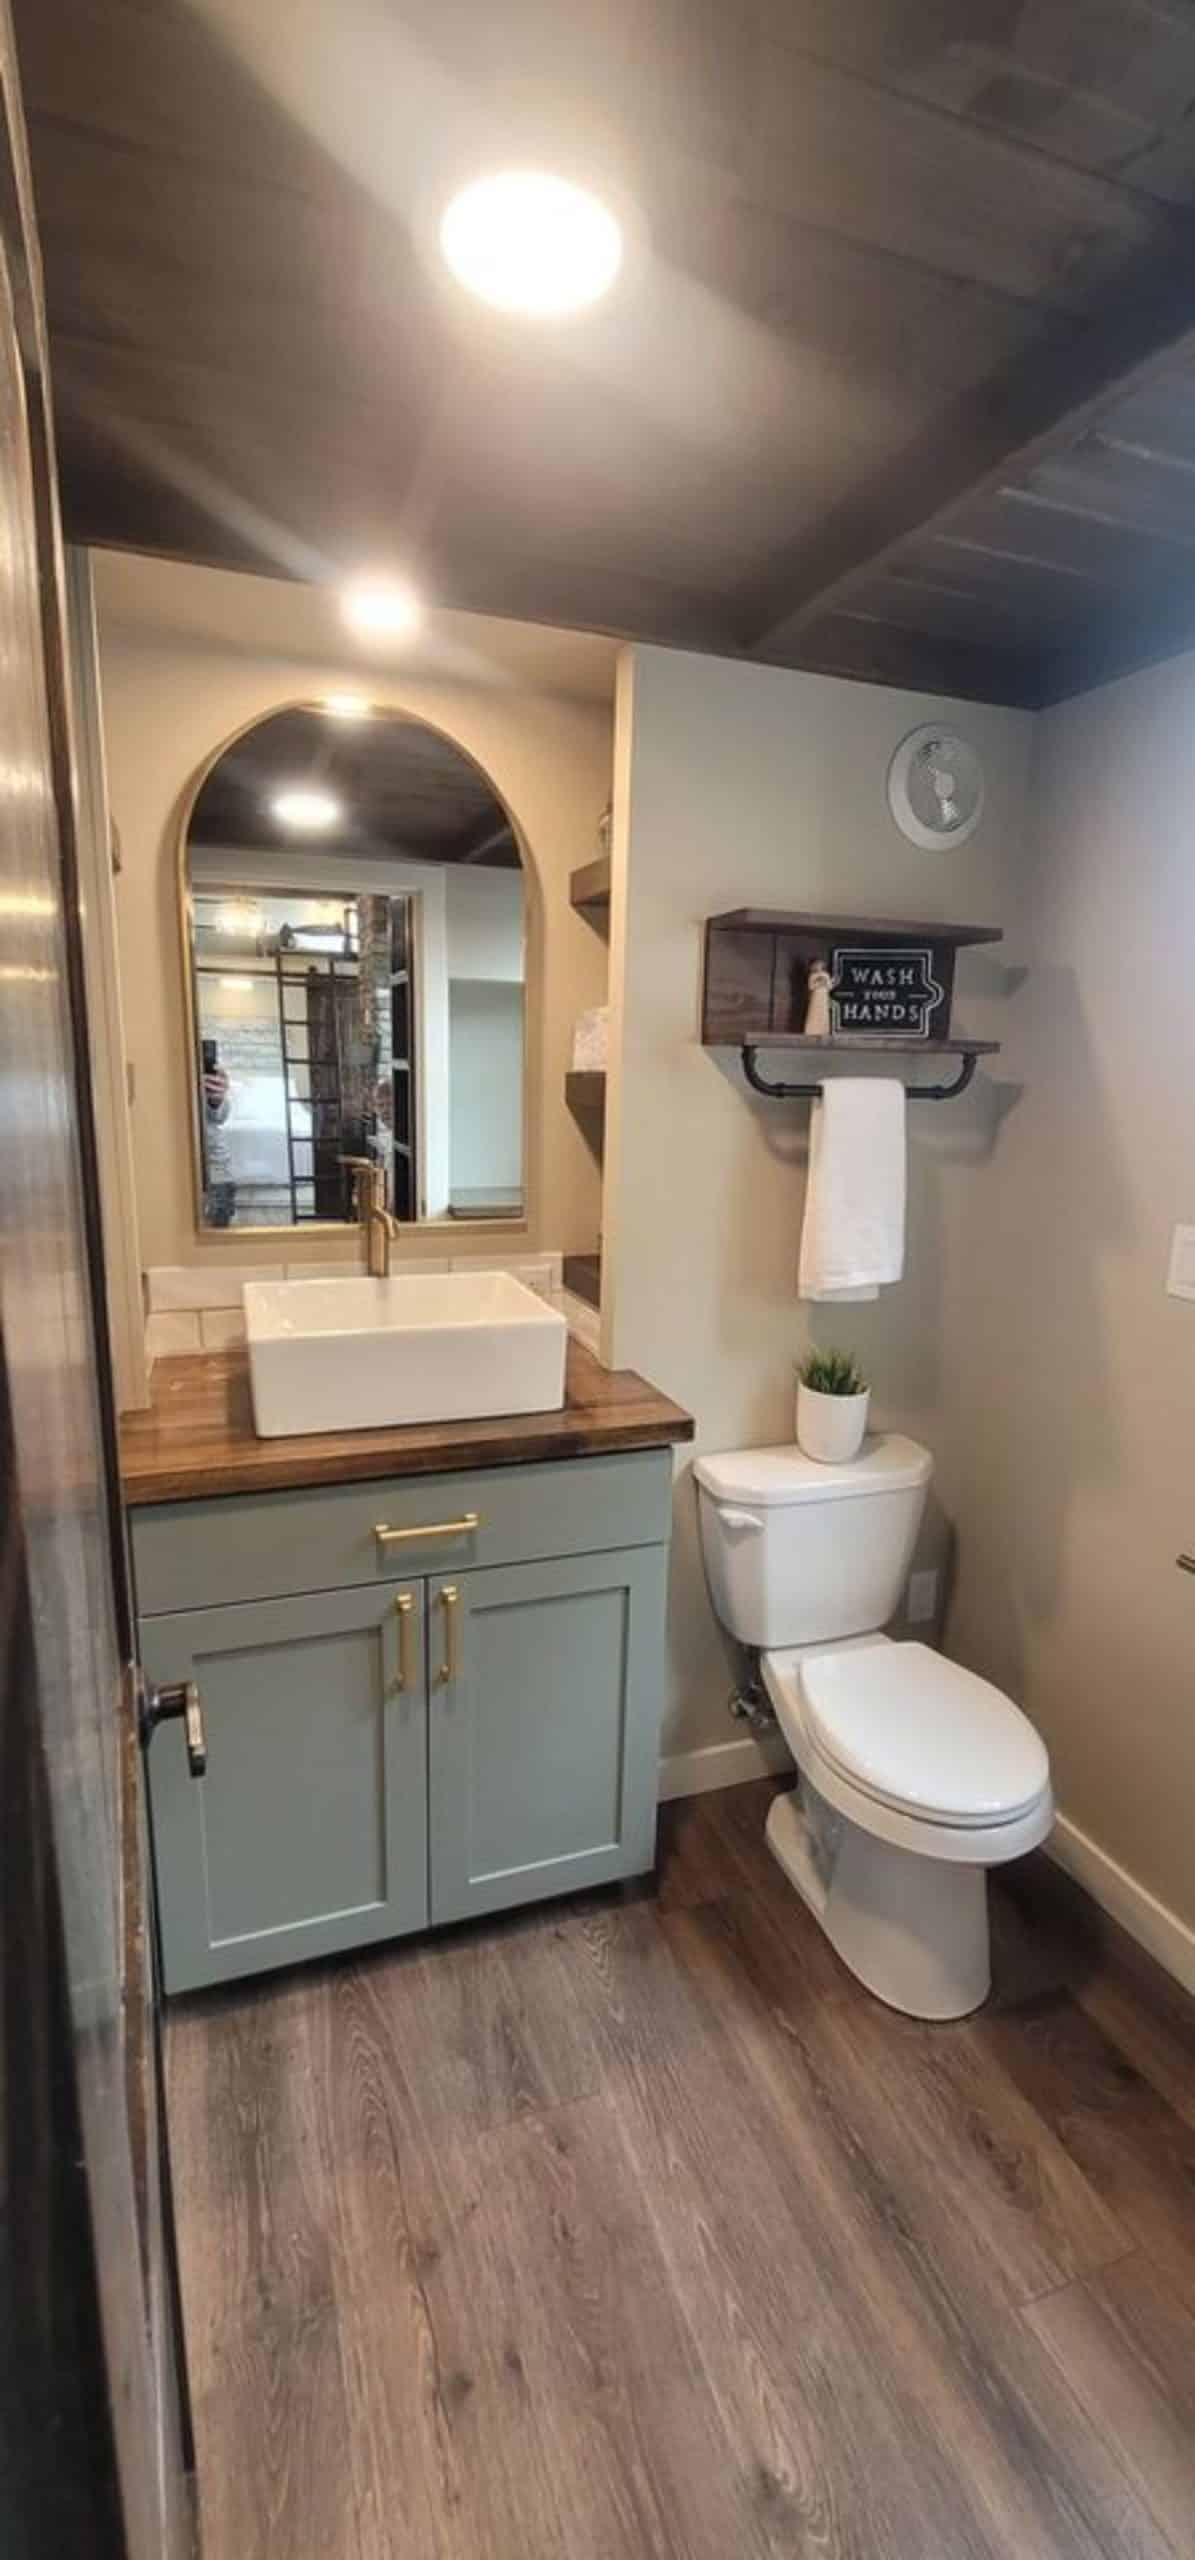 bathroom of 3 bedroom tiny house has all the standard fittings